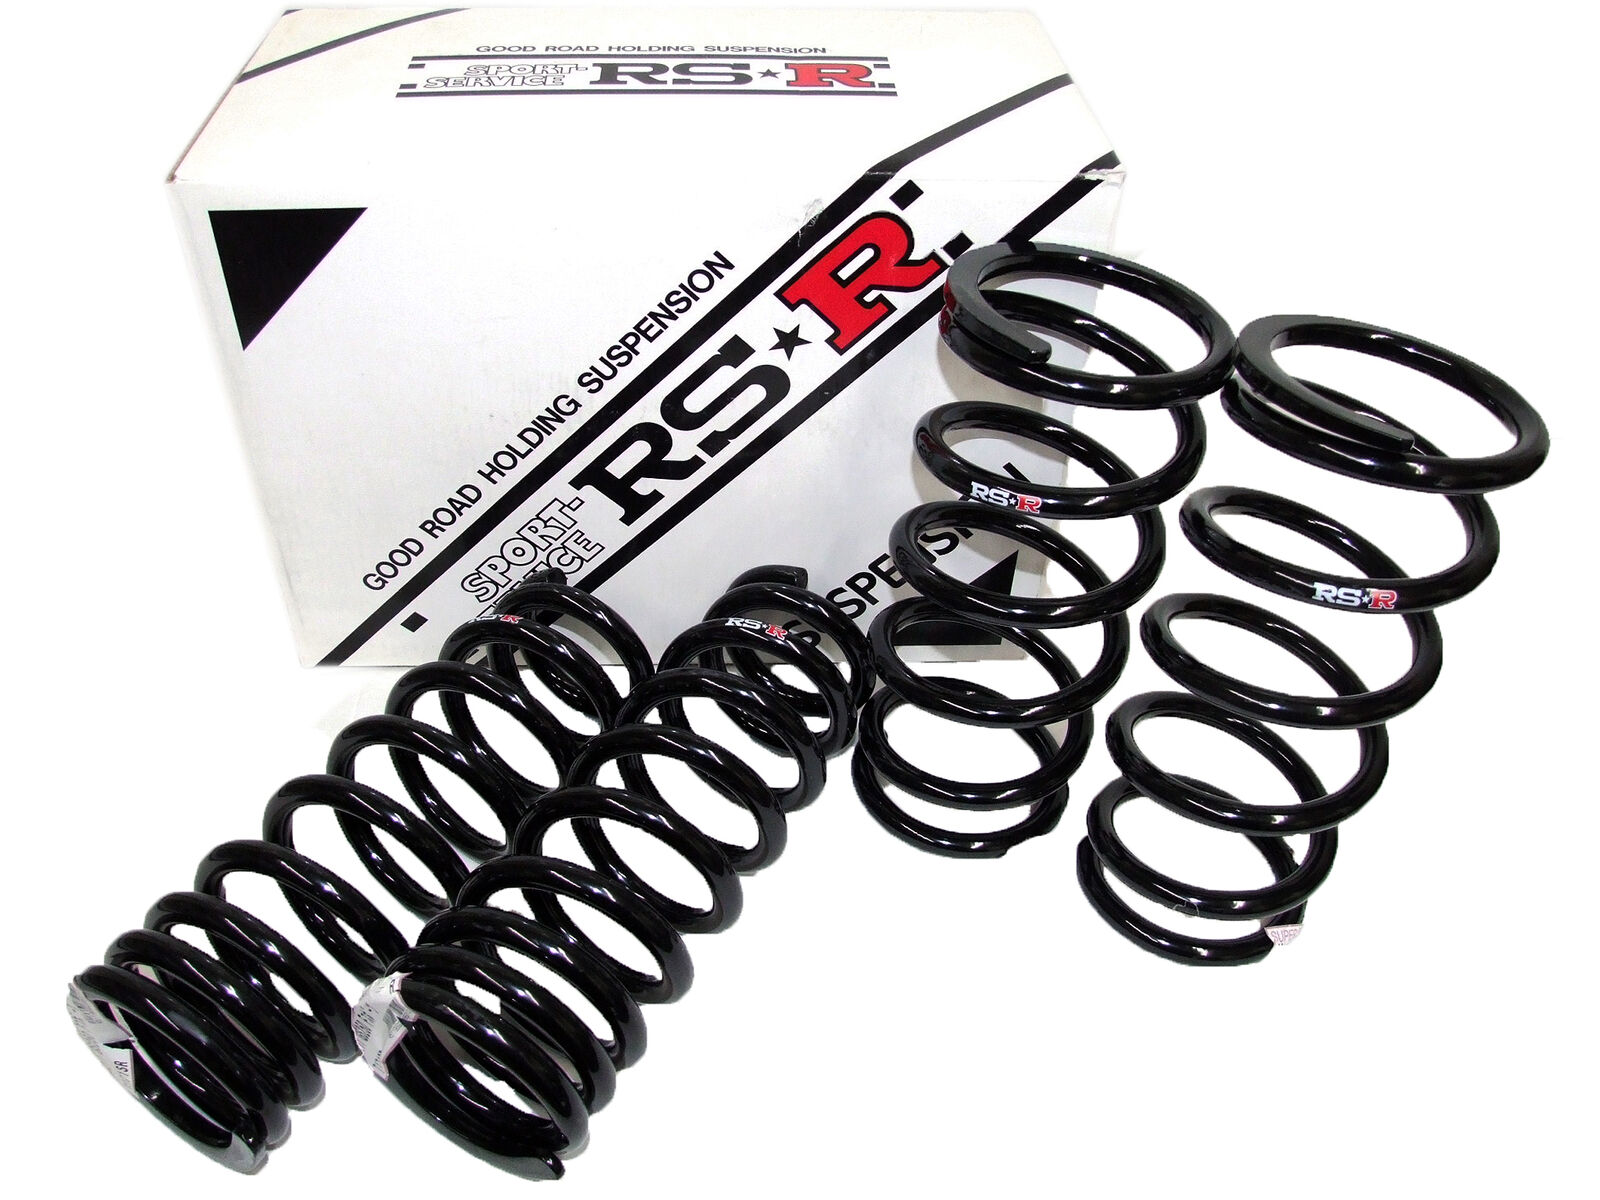 RS-R T720S SuperDown Lowering Springs for 91-99 Toyota Previa Made in Japan